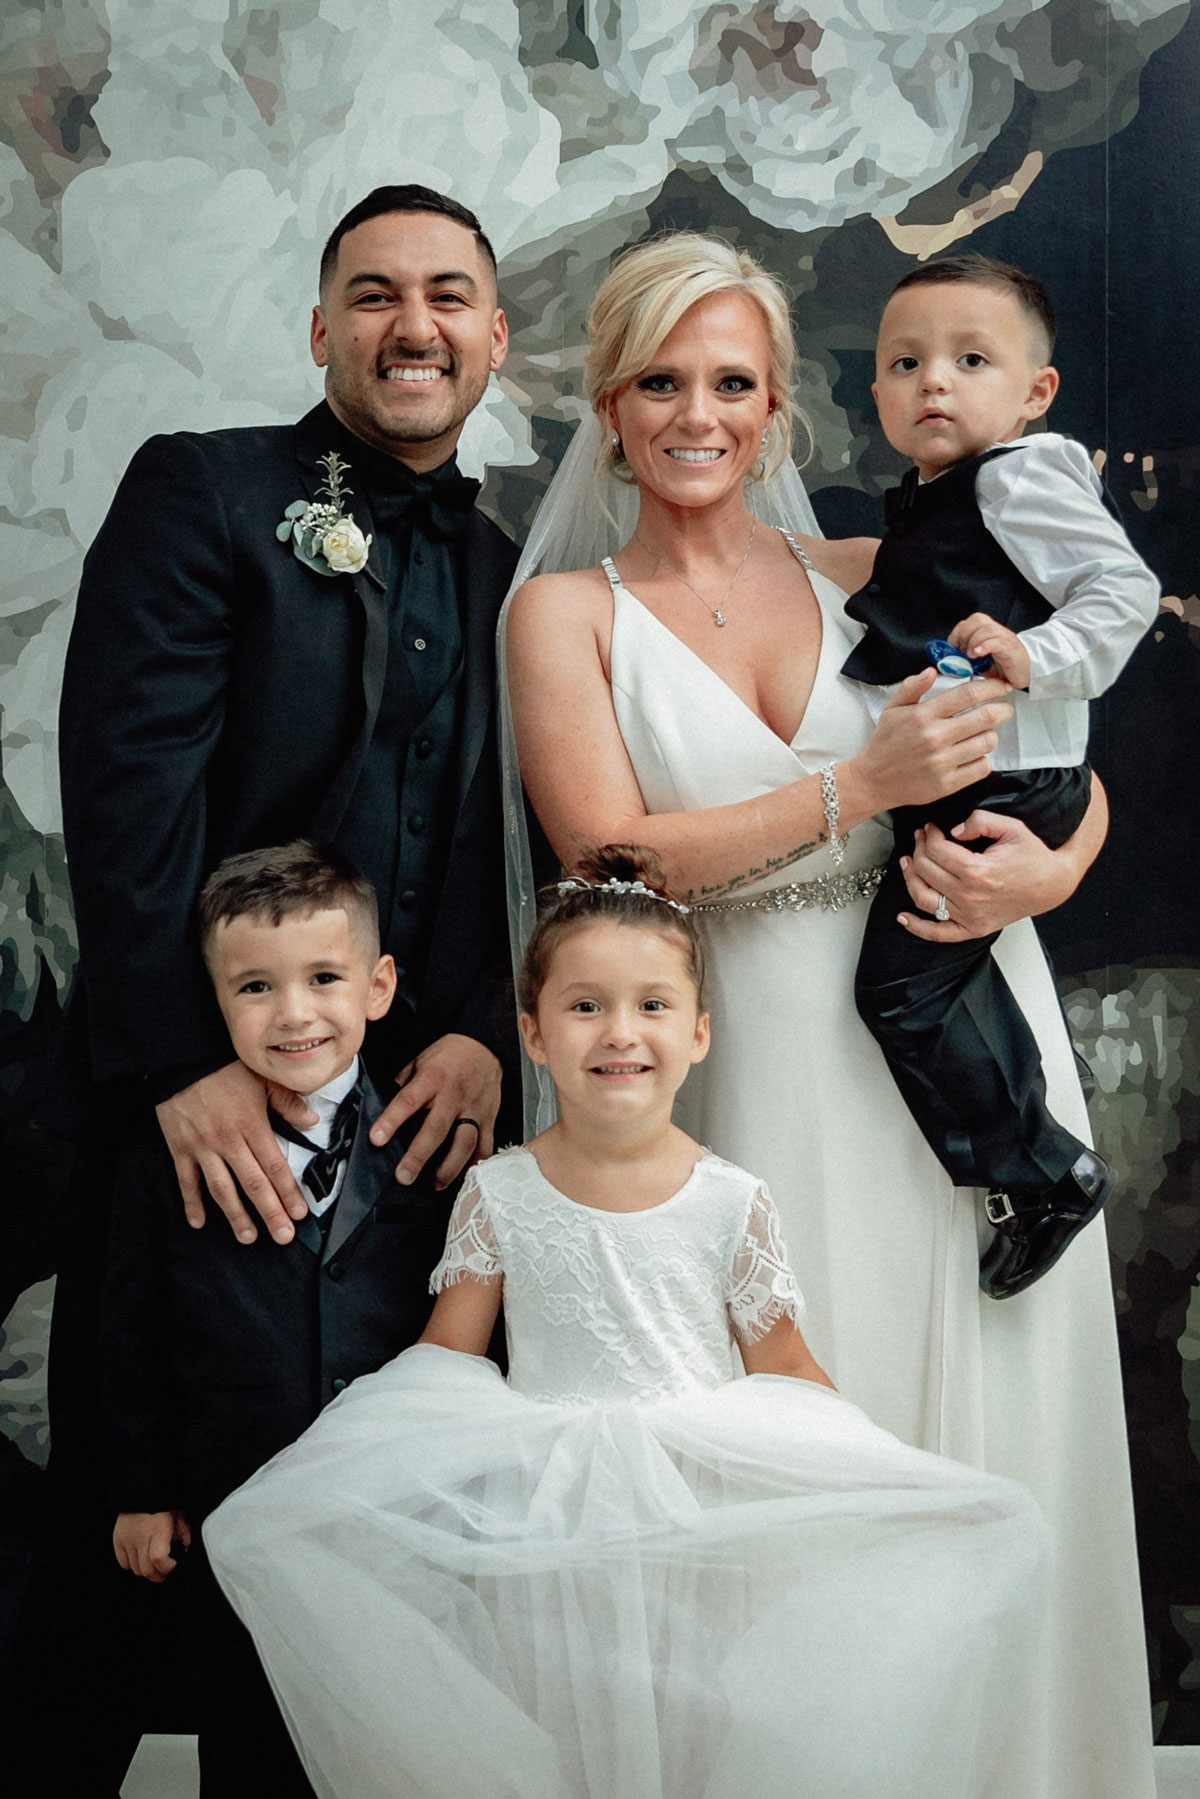 Family portrait of the bride, groom, and their children on the day of their elopement